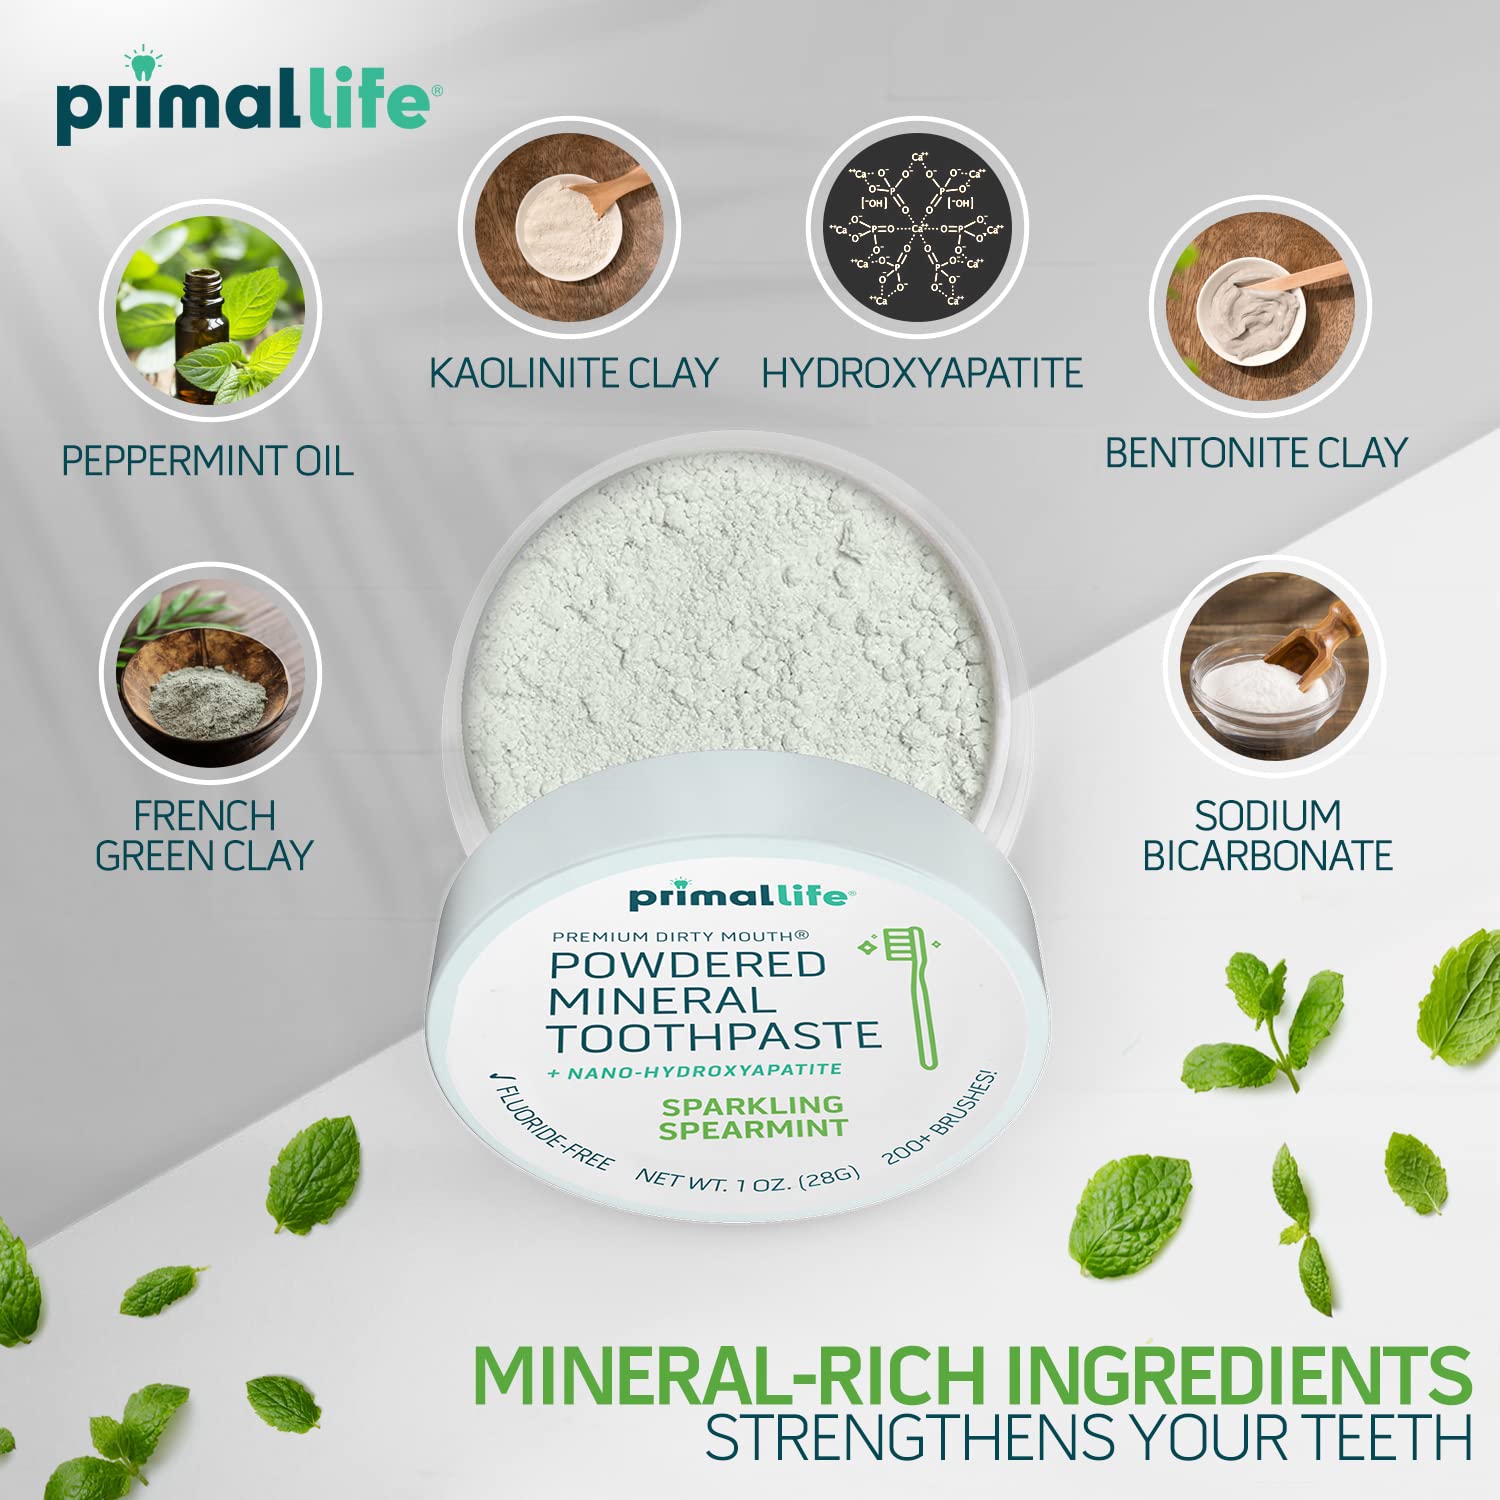 Primal Life Organics - Dirty Mouth Toothpowder, Tooth Cleaning Powder, Flavored Essential Oils with Natural Kaolin & Bentonite Clay, Good for 200+ Brushings, Paleo, Organic, Vegan (Spearmint, 1 oz)